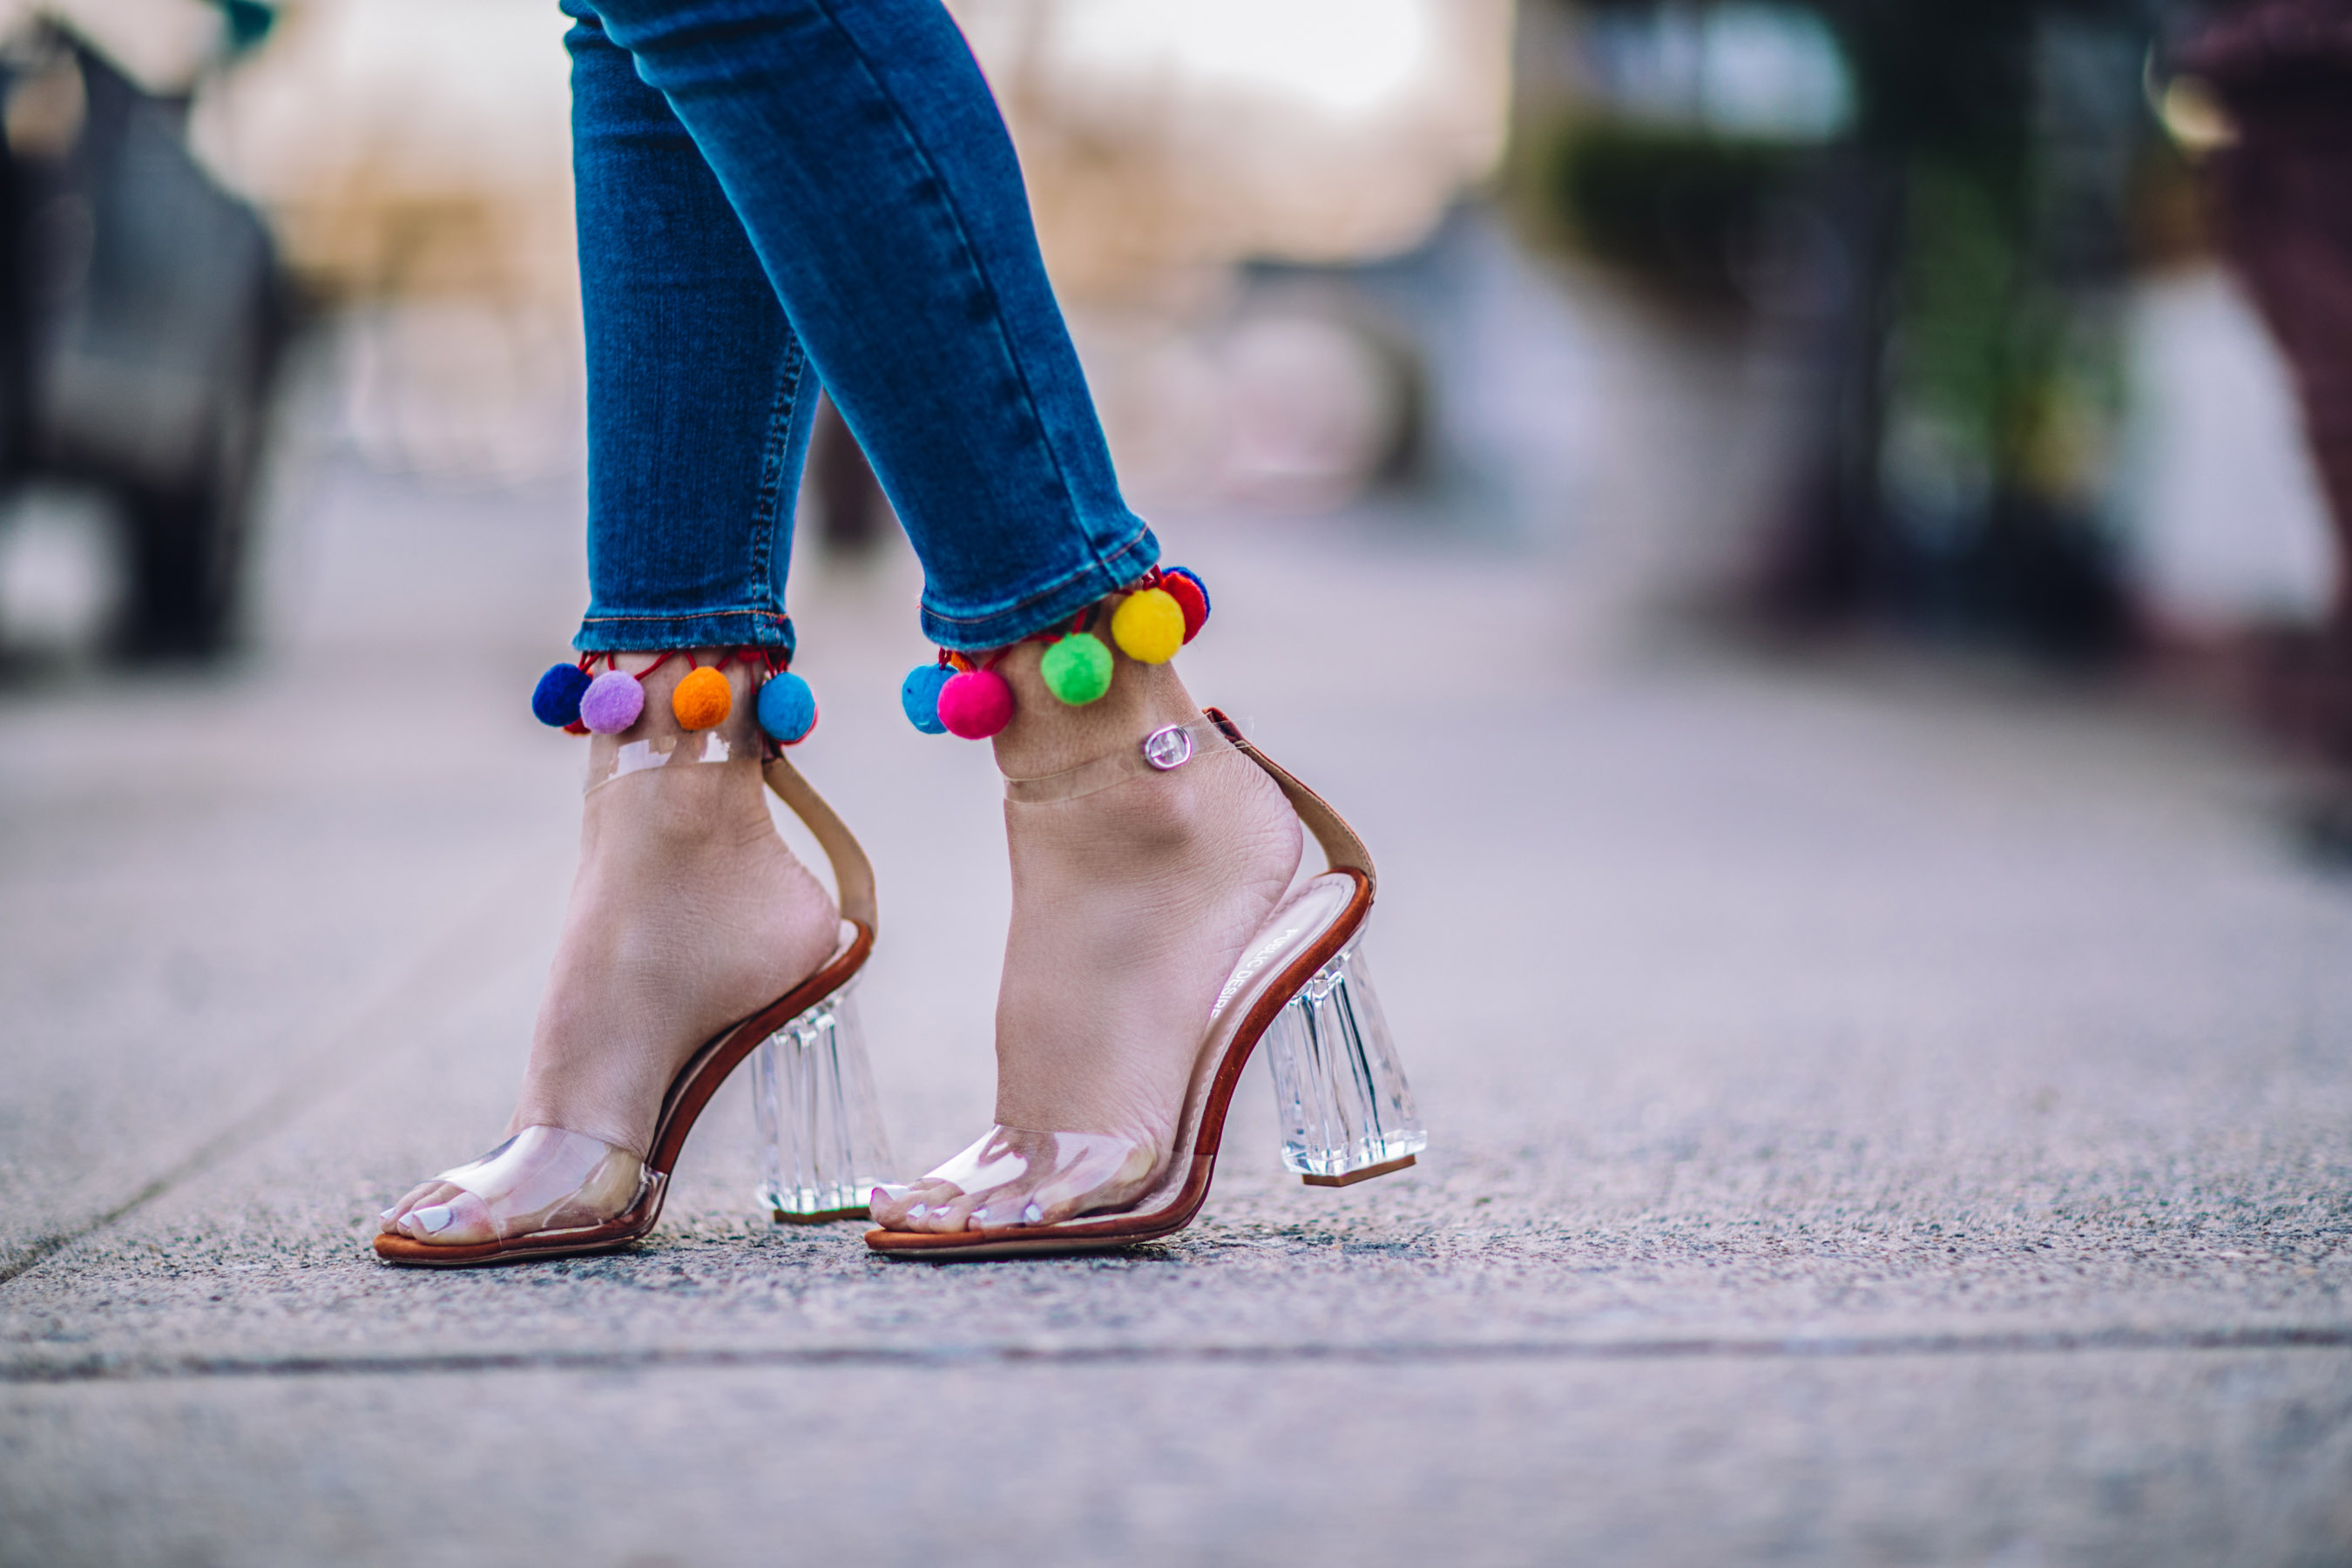 Lucid Heels Shoes For Spring - These Are The 7 Must Have Styles Of Shoe For Spring // Notjessfashion.com